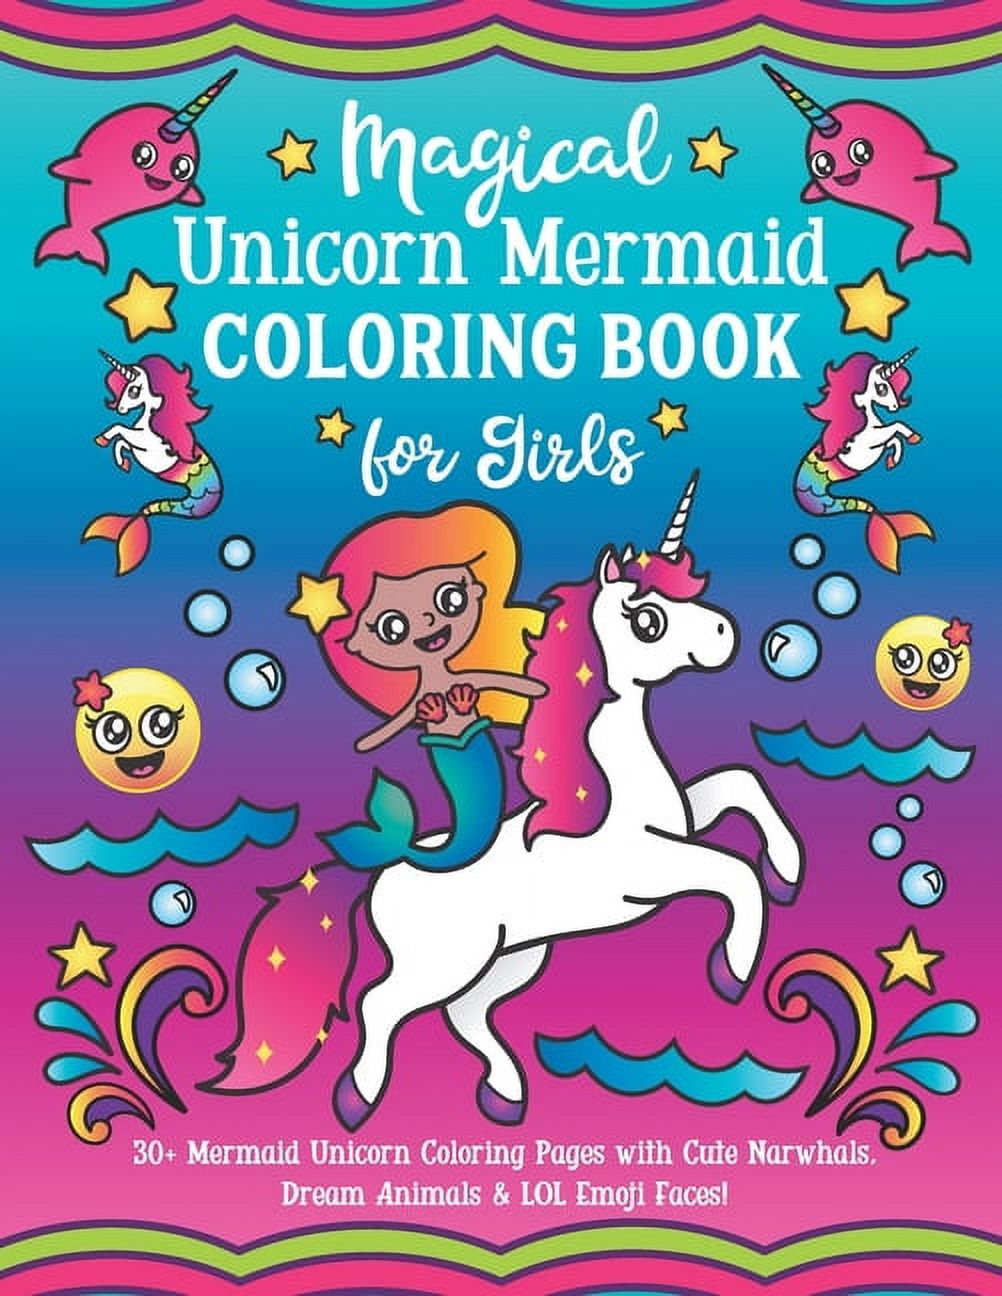 (Paperback)　Animals　Unicorn　Dream　with　Book　Narwhals,　30+　Emoji　Pages　Mermaid　Coloring　Girls　for　Faces!　Mermaid　Unicorn　Magical　LOL　Coloring　Cute